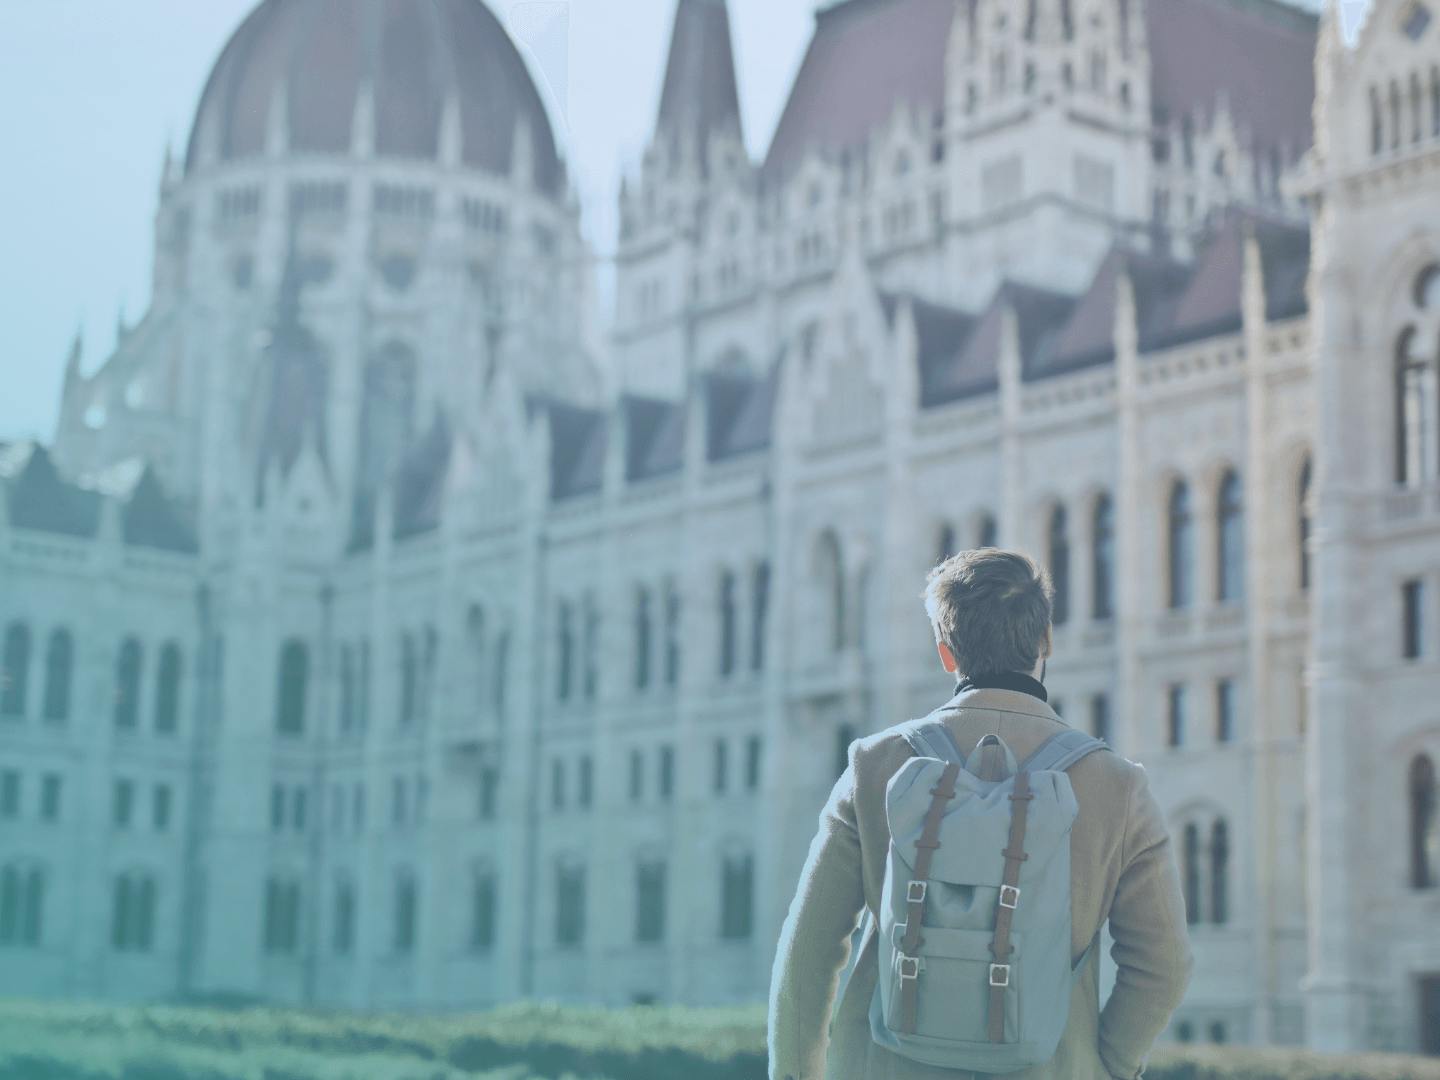 A man with a backpack is standing in front of the Hungarian parliament building.